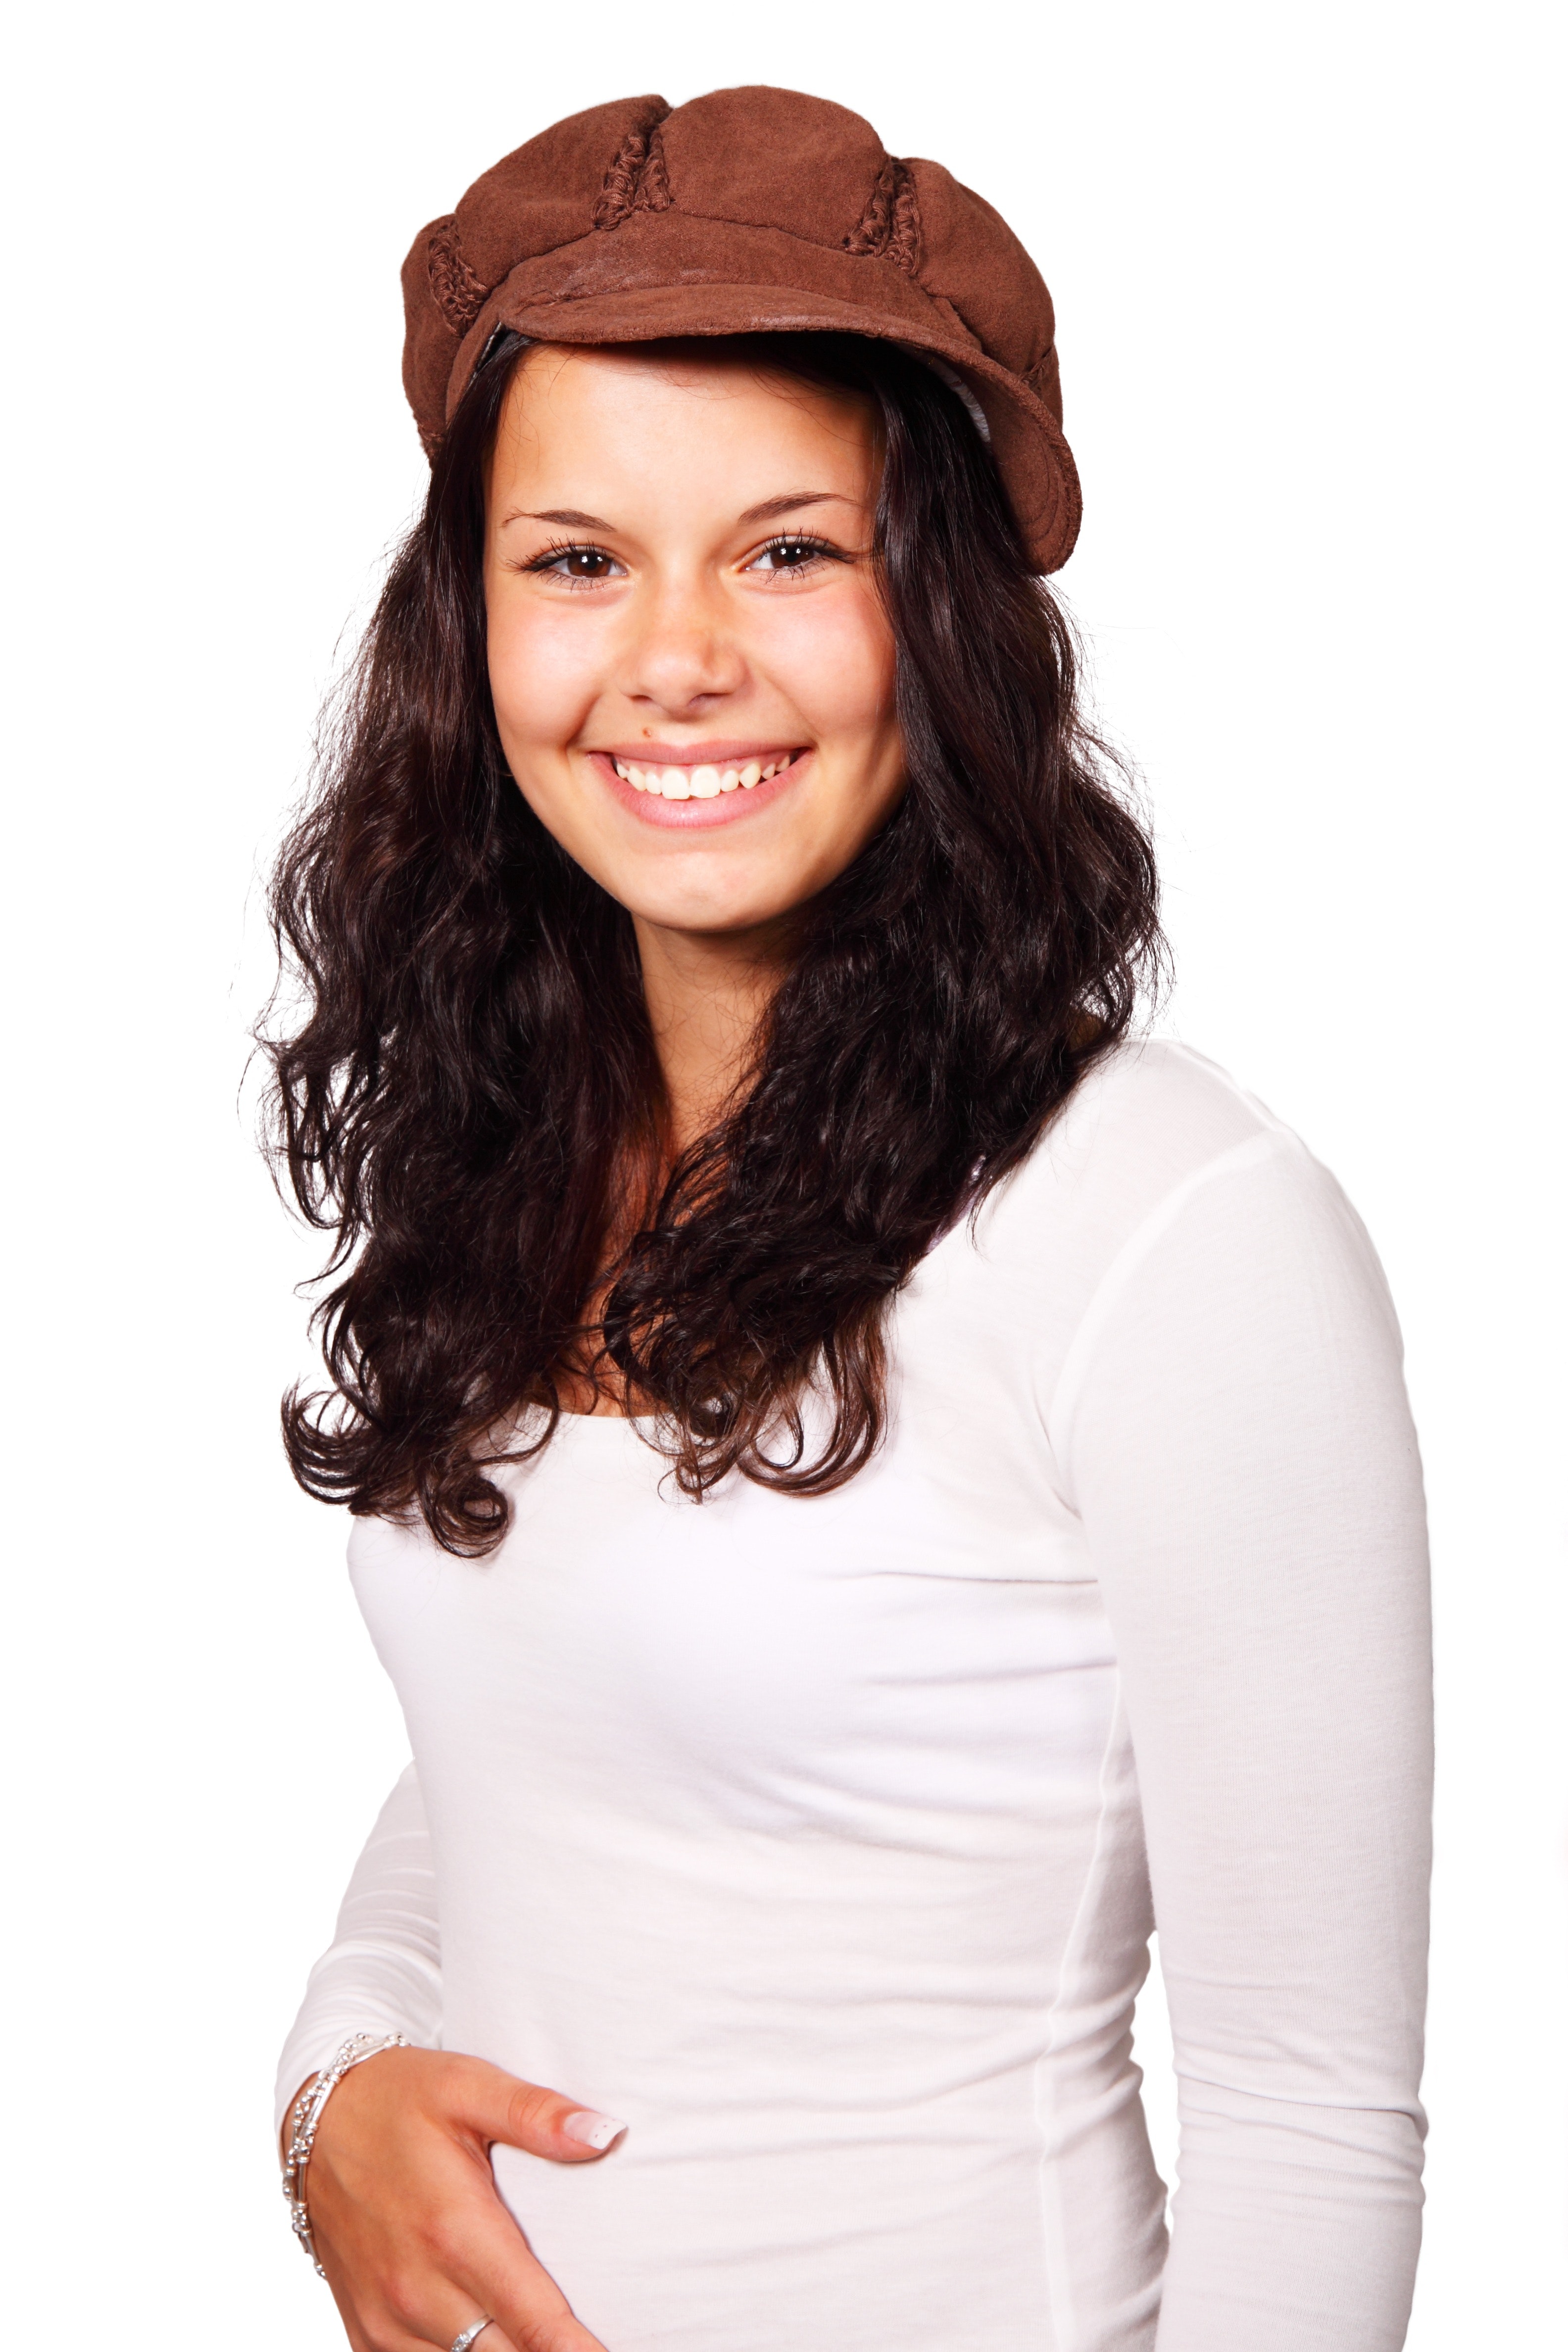 Woman wearing brown cap and white long sleeve shirt photo